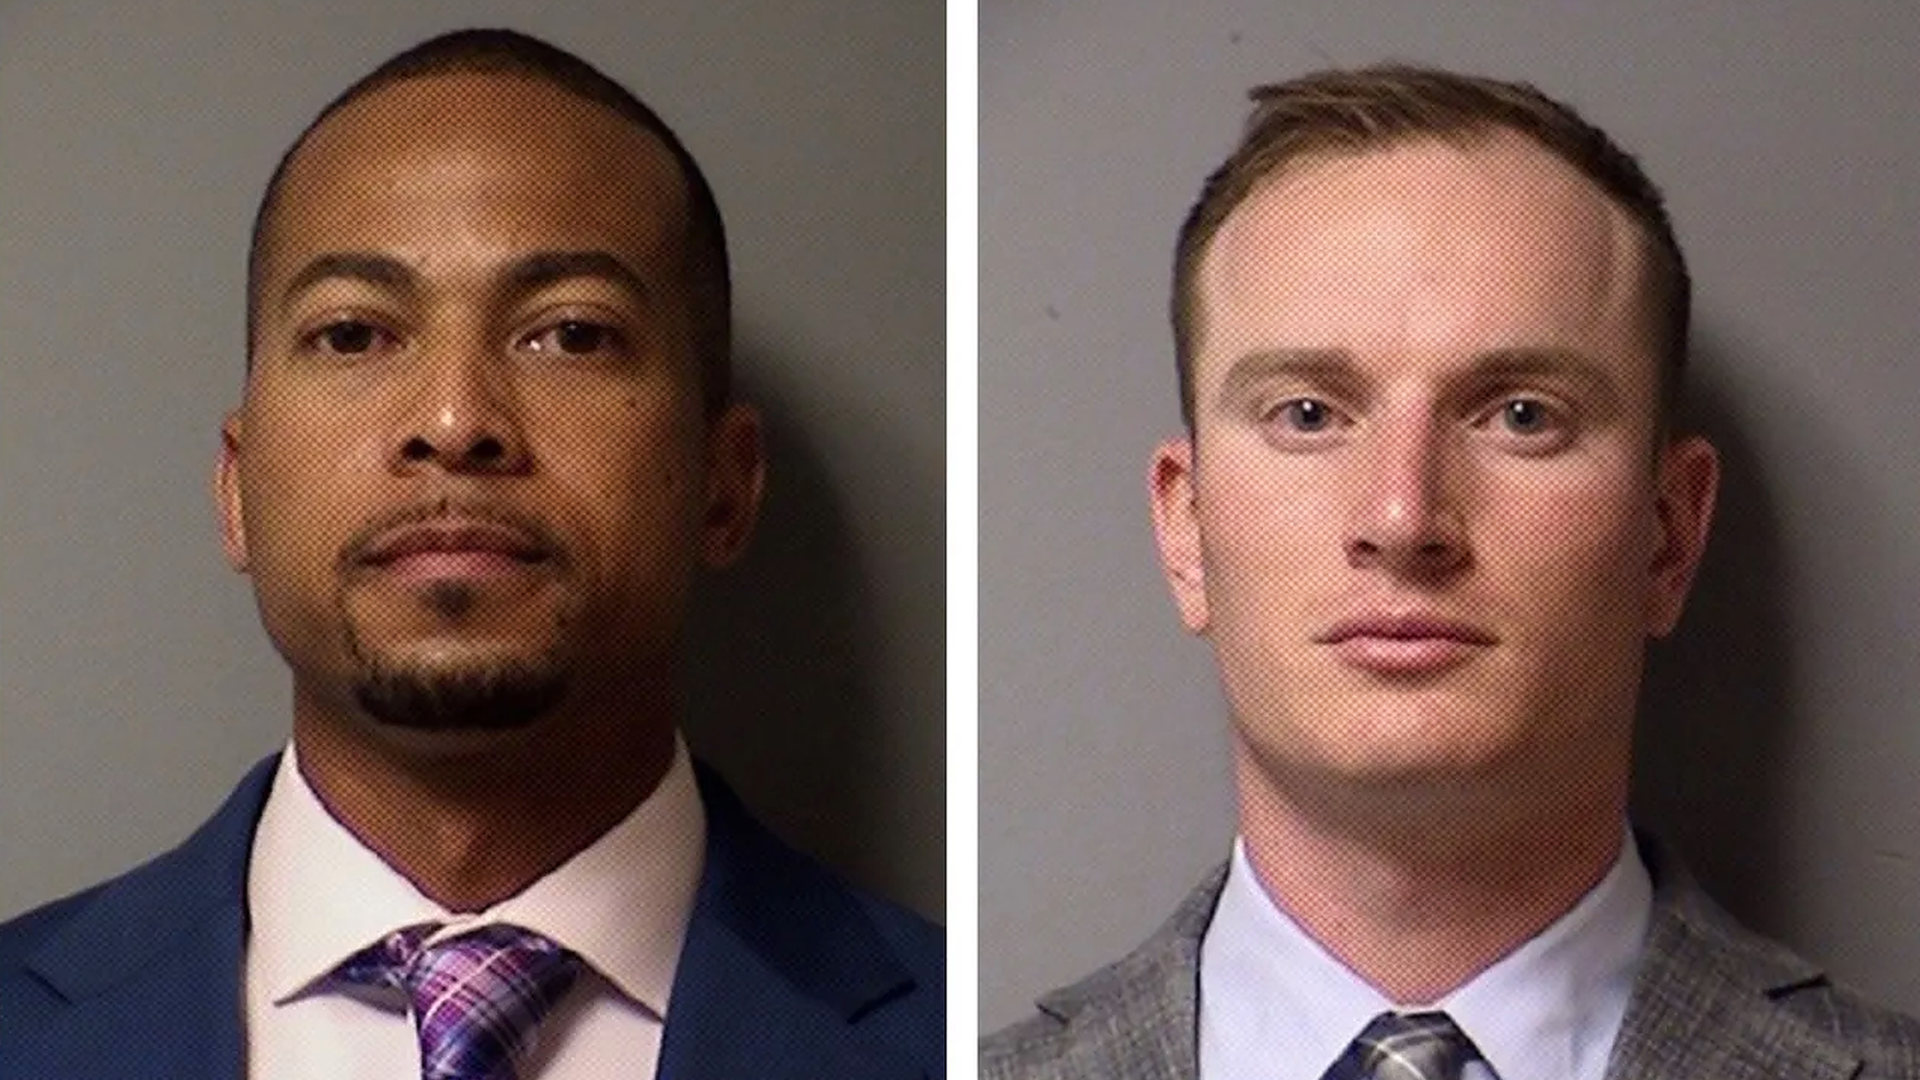 James Johnson, left, and Zachary Camden, former sheriff’s deputies in Texas, have been indicted for second degree manslaughter.